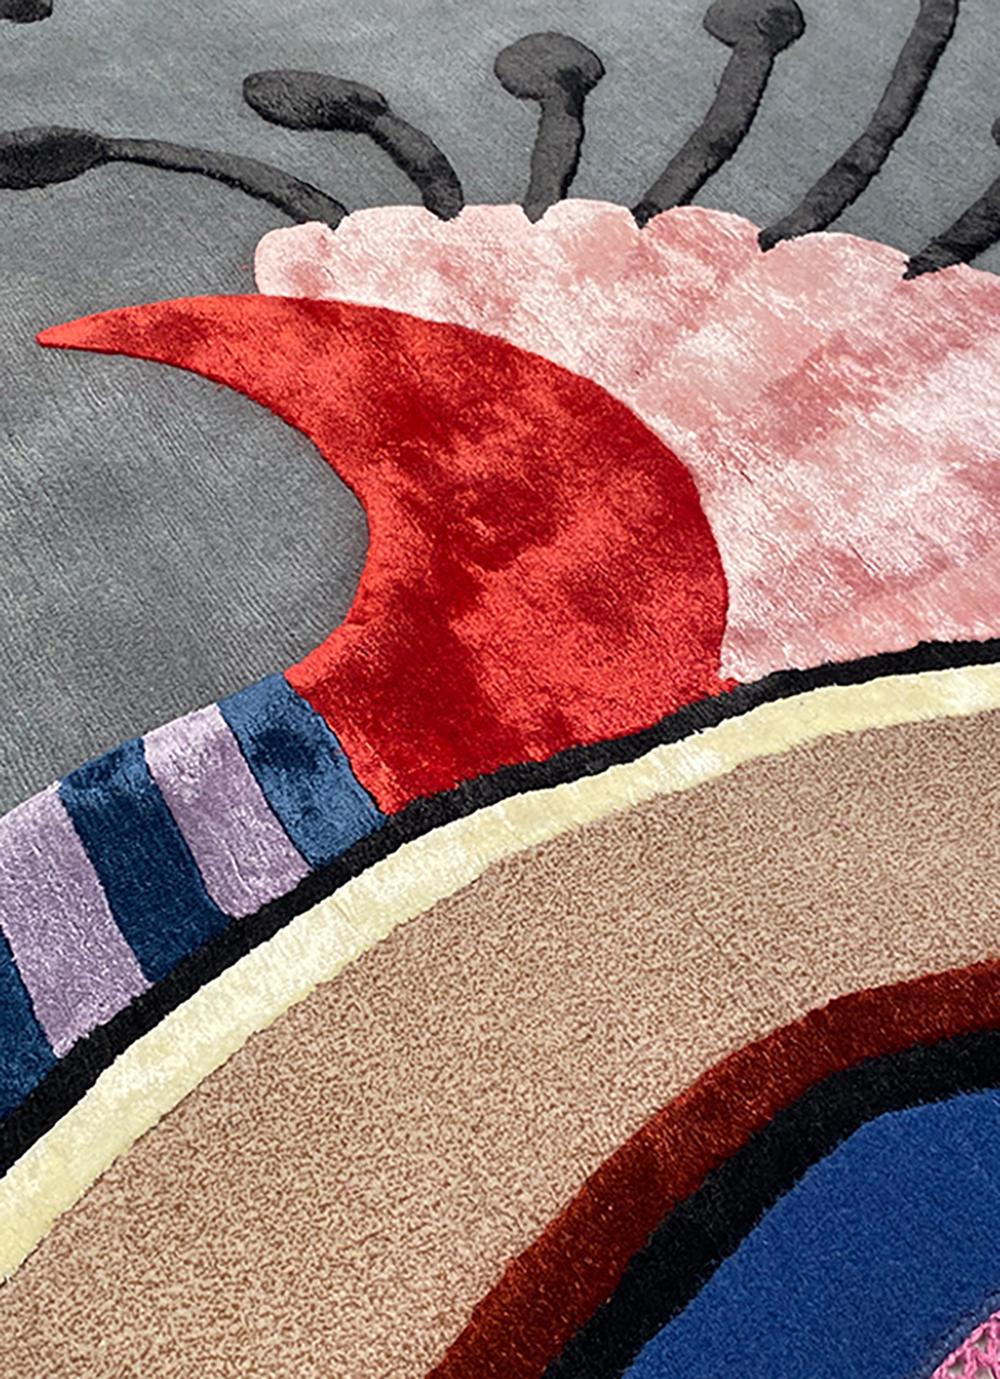 It’s a playful  hand-knotted rug made with Himalayan wool and natural silk, inspired by flora and organic shapes with vibrant colors and stylistic geometries that reflect artist’s eclectic vision and her personal take on interior design.

This rug